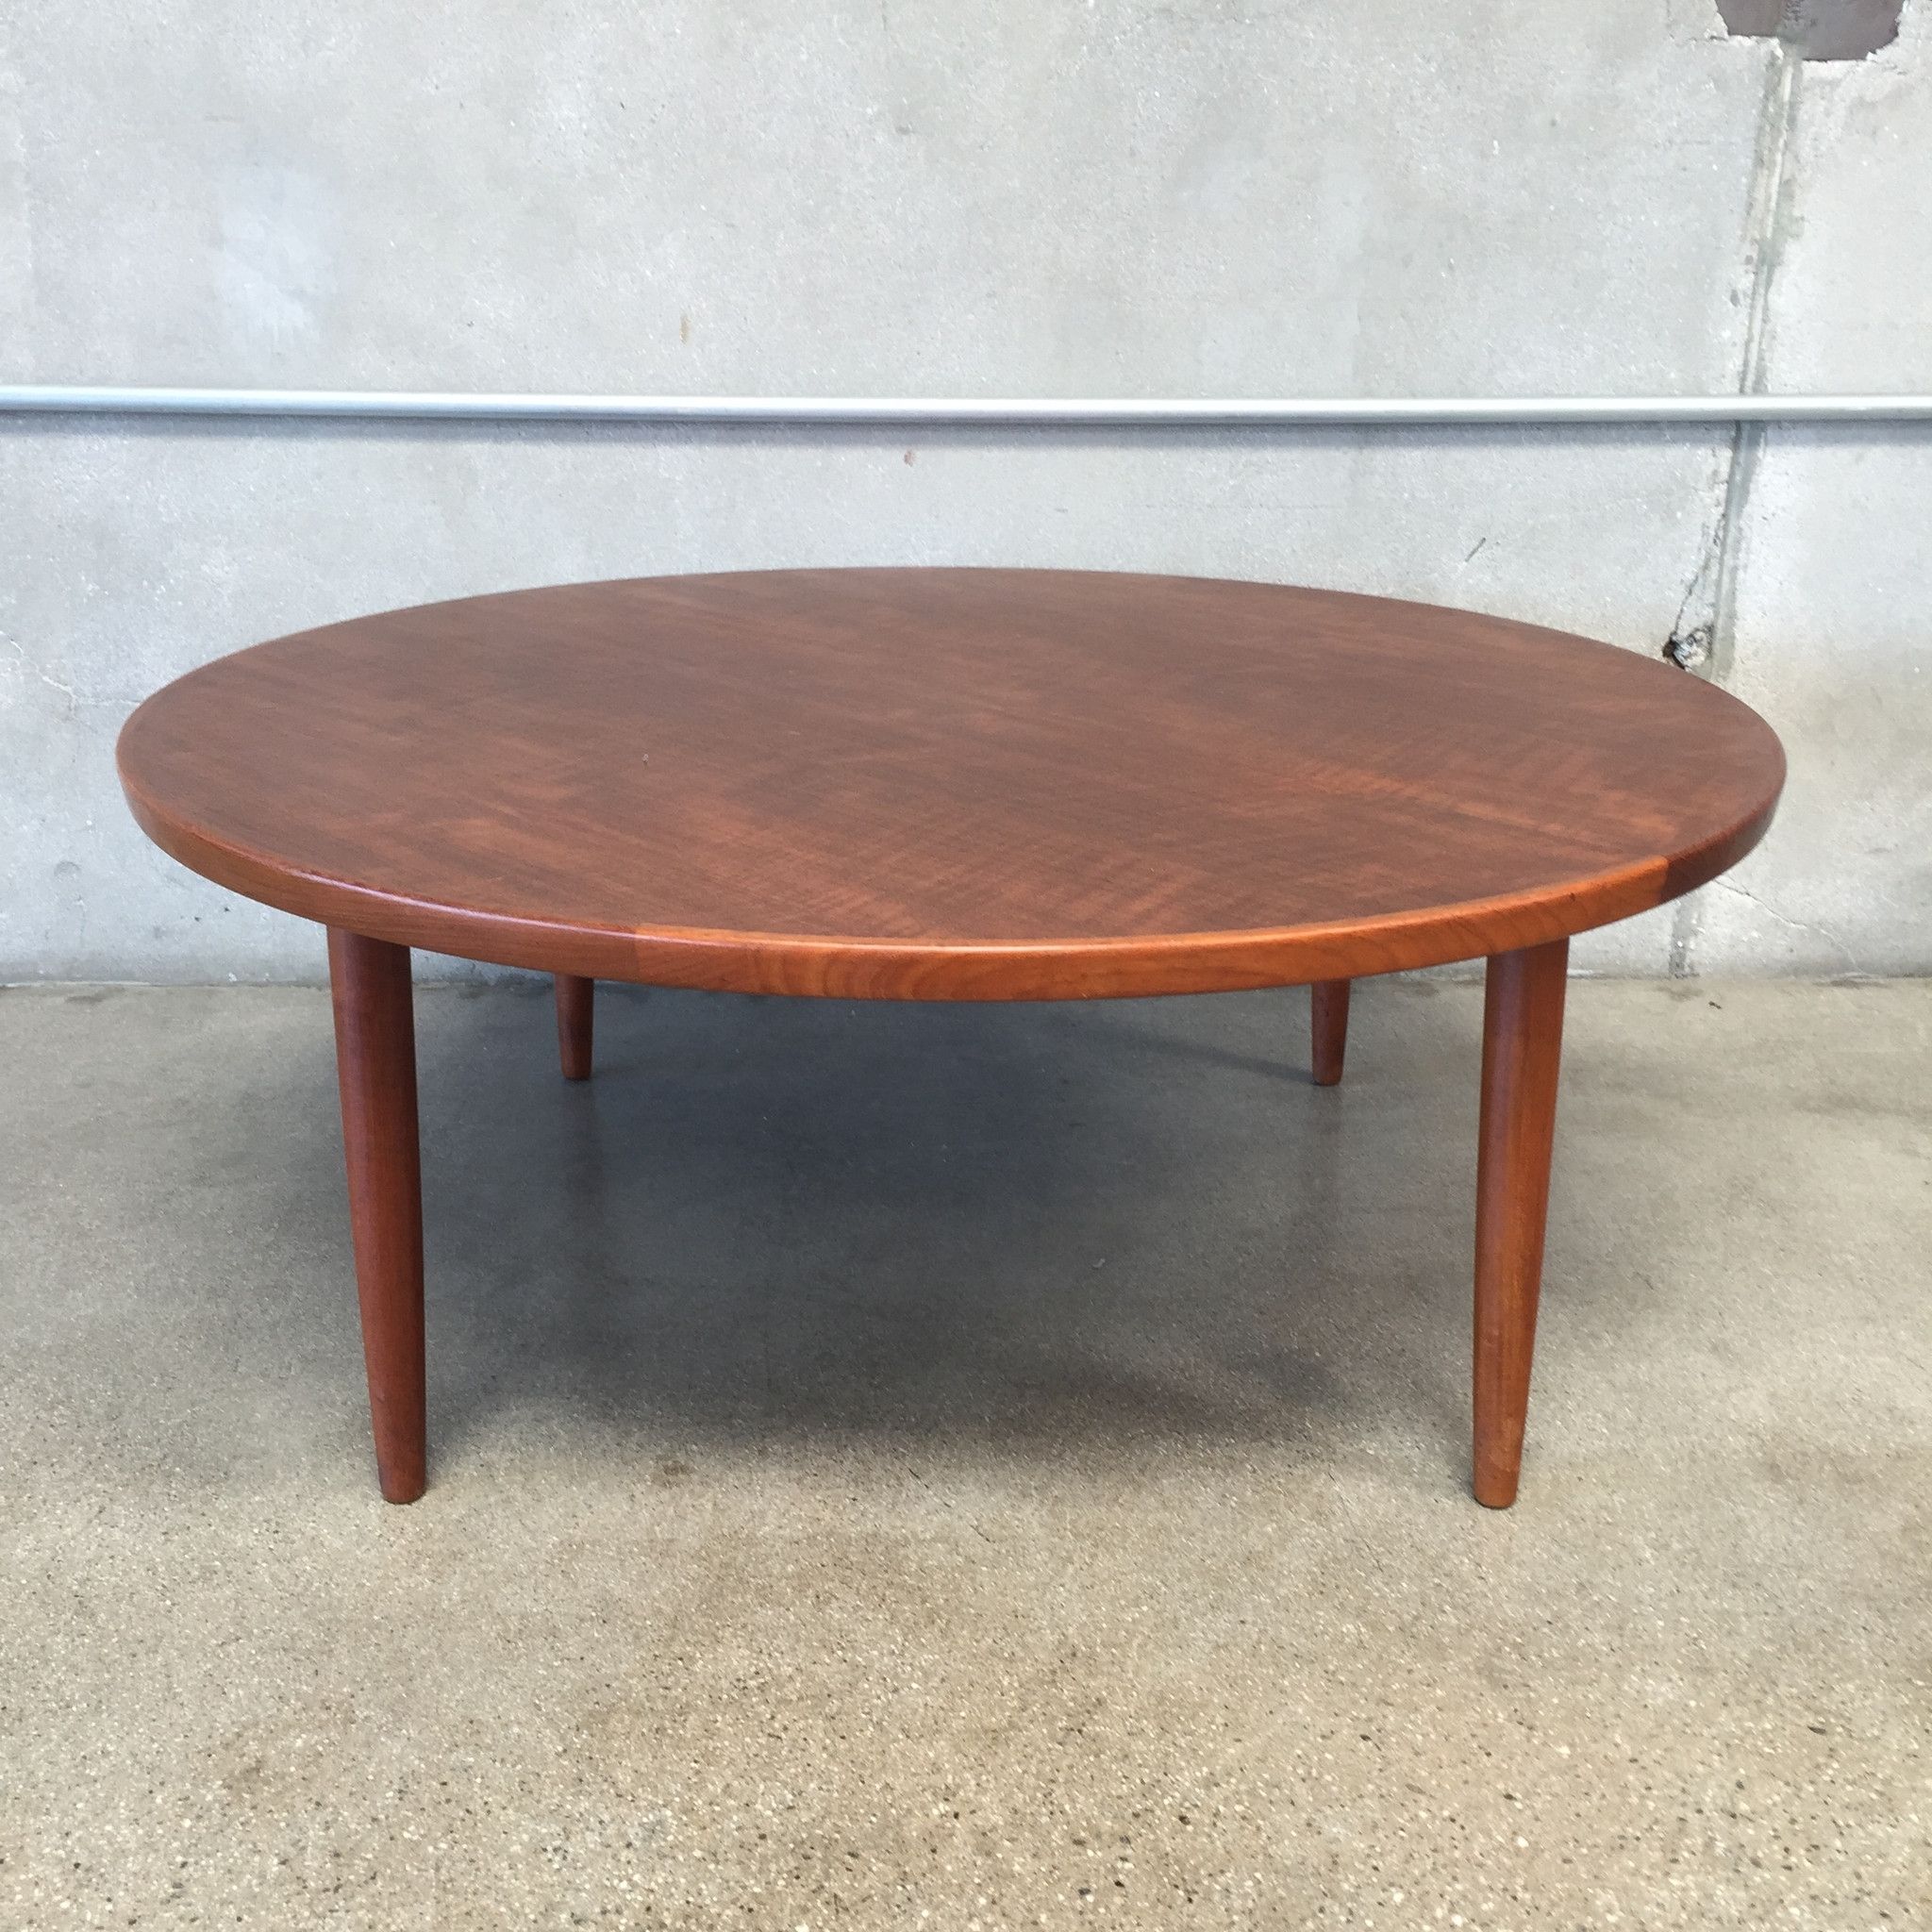 Photo Of Round Teak Coffee Table With Teak Coffee Table Set Simple Throughout Round Teak Coffee Tables (View 1 of 30)